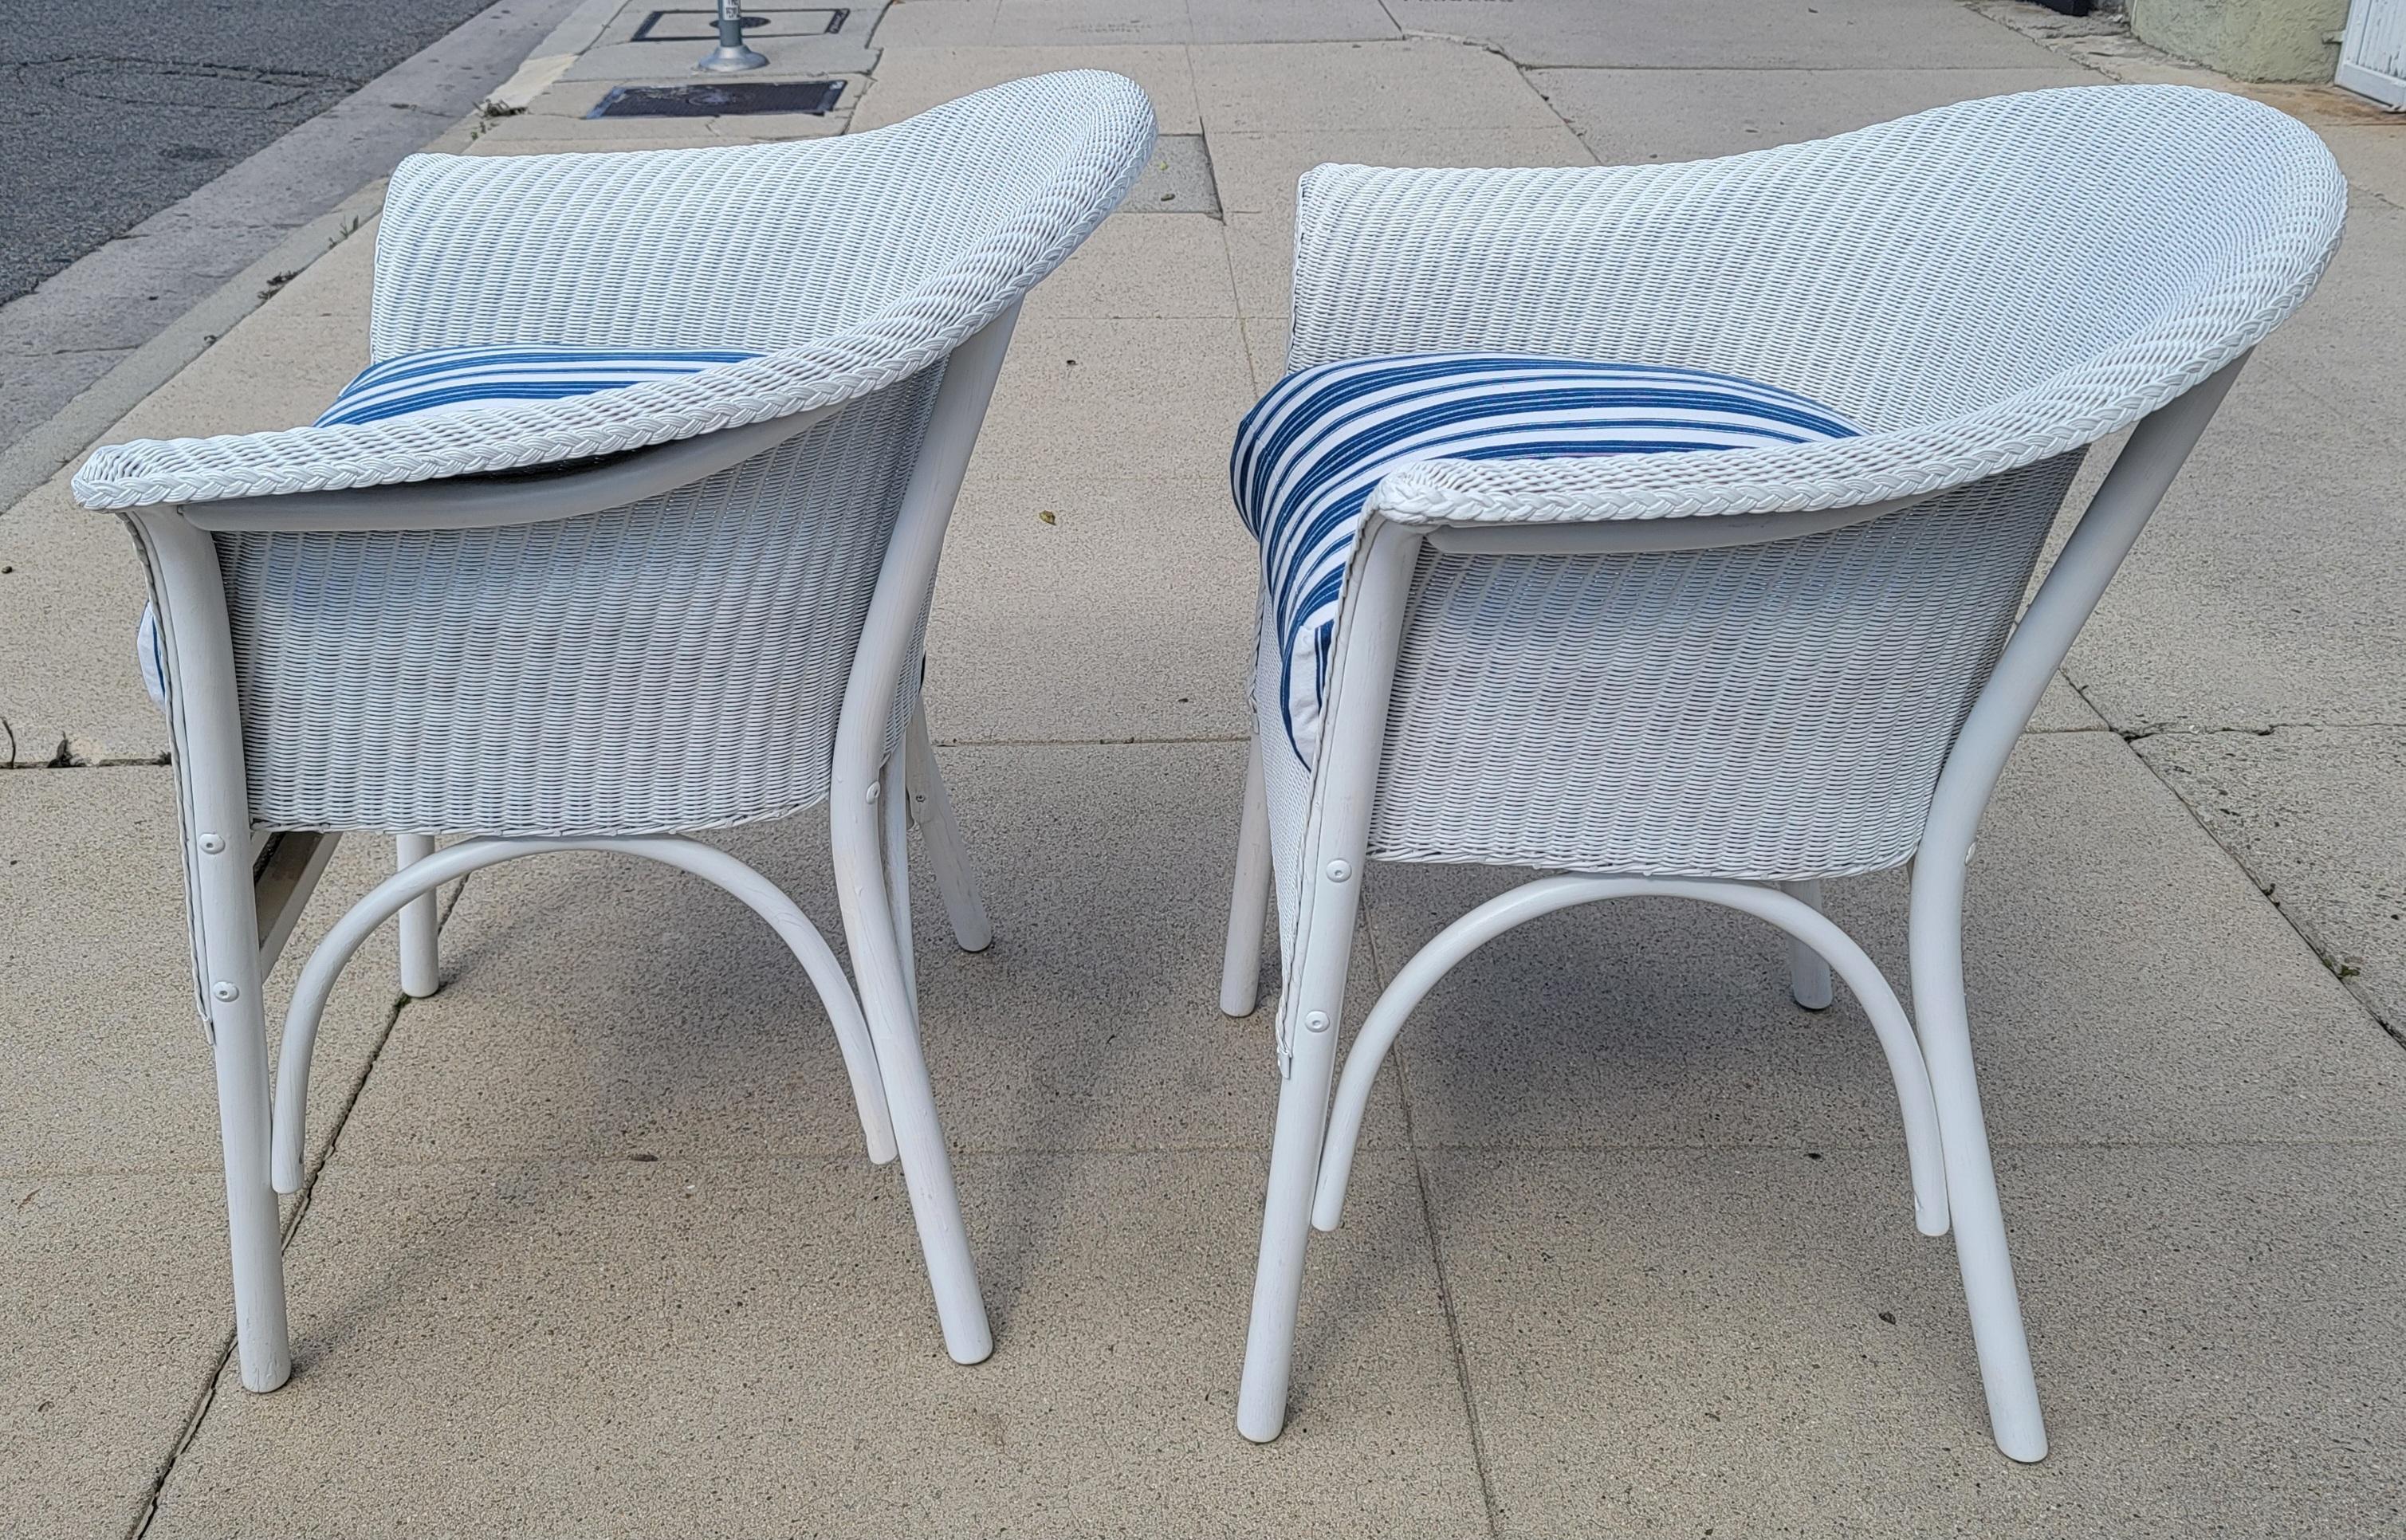 Signed Lloyd Loom White Wicker Chairs W/ Antique Ticking Cushions In Good Condition For Sale In Los Angeles, CA